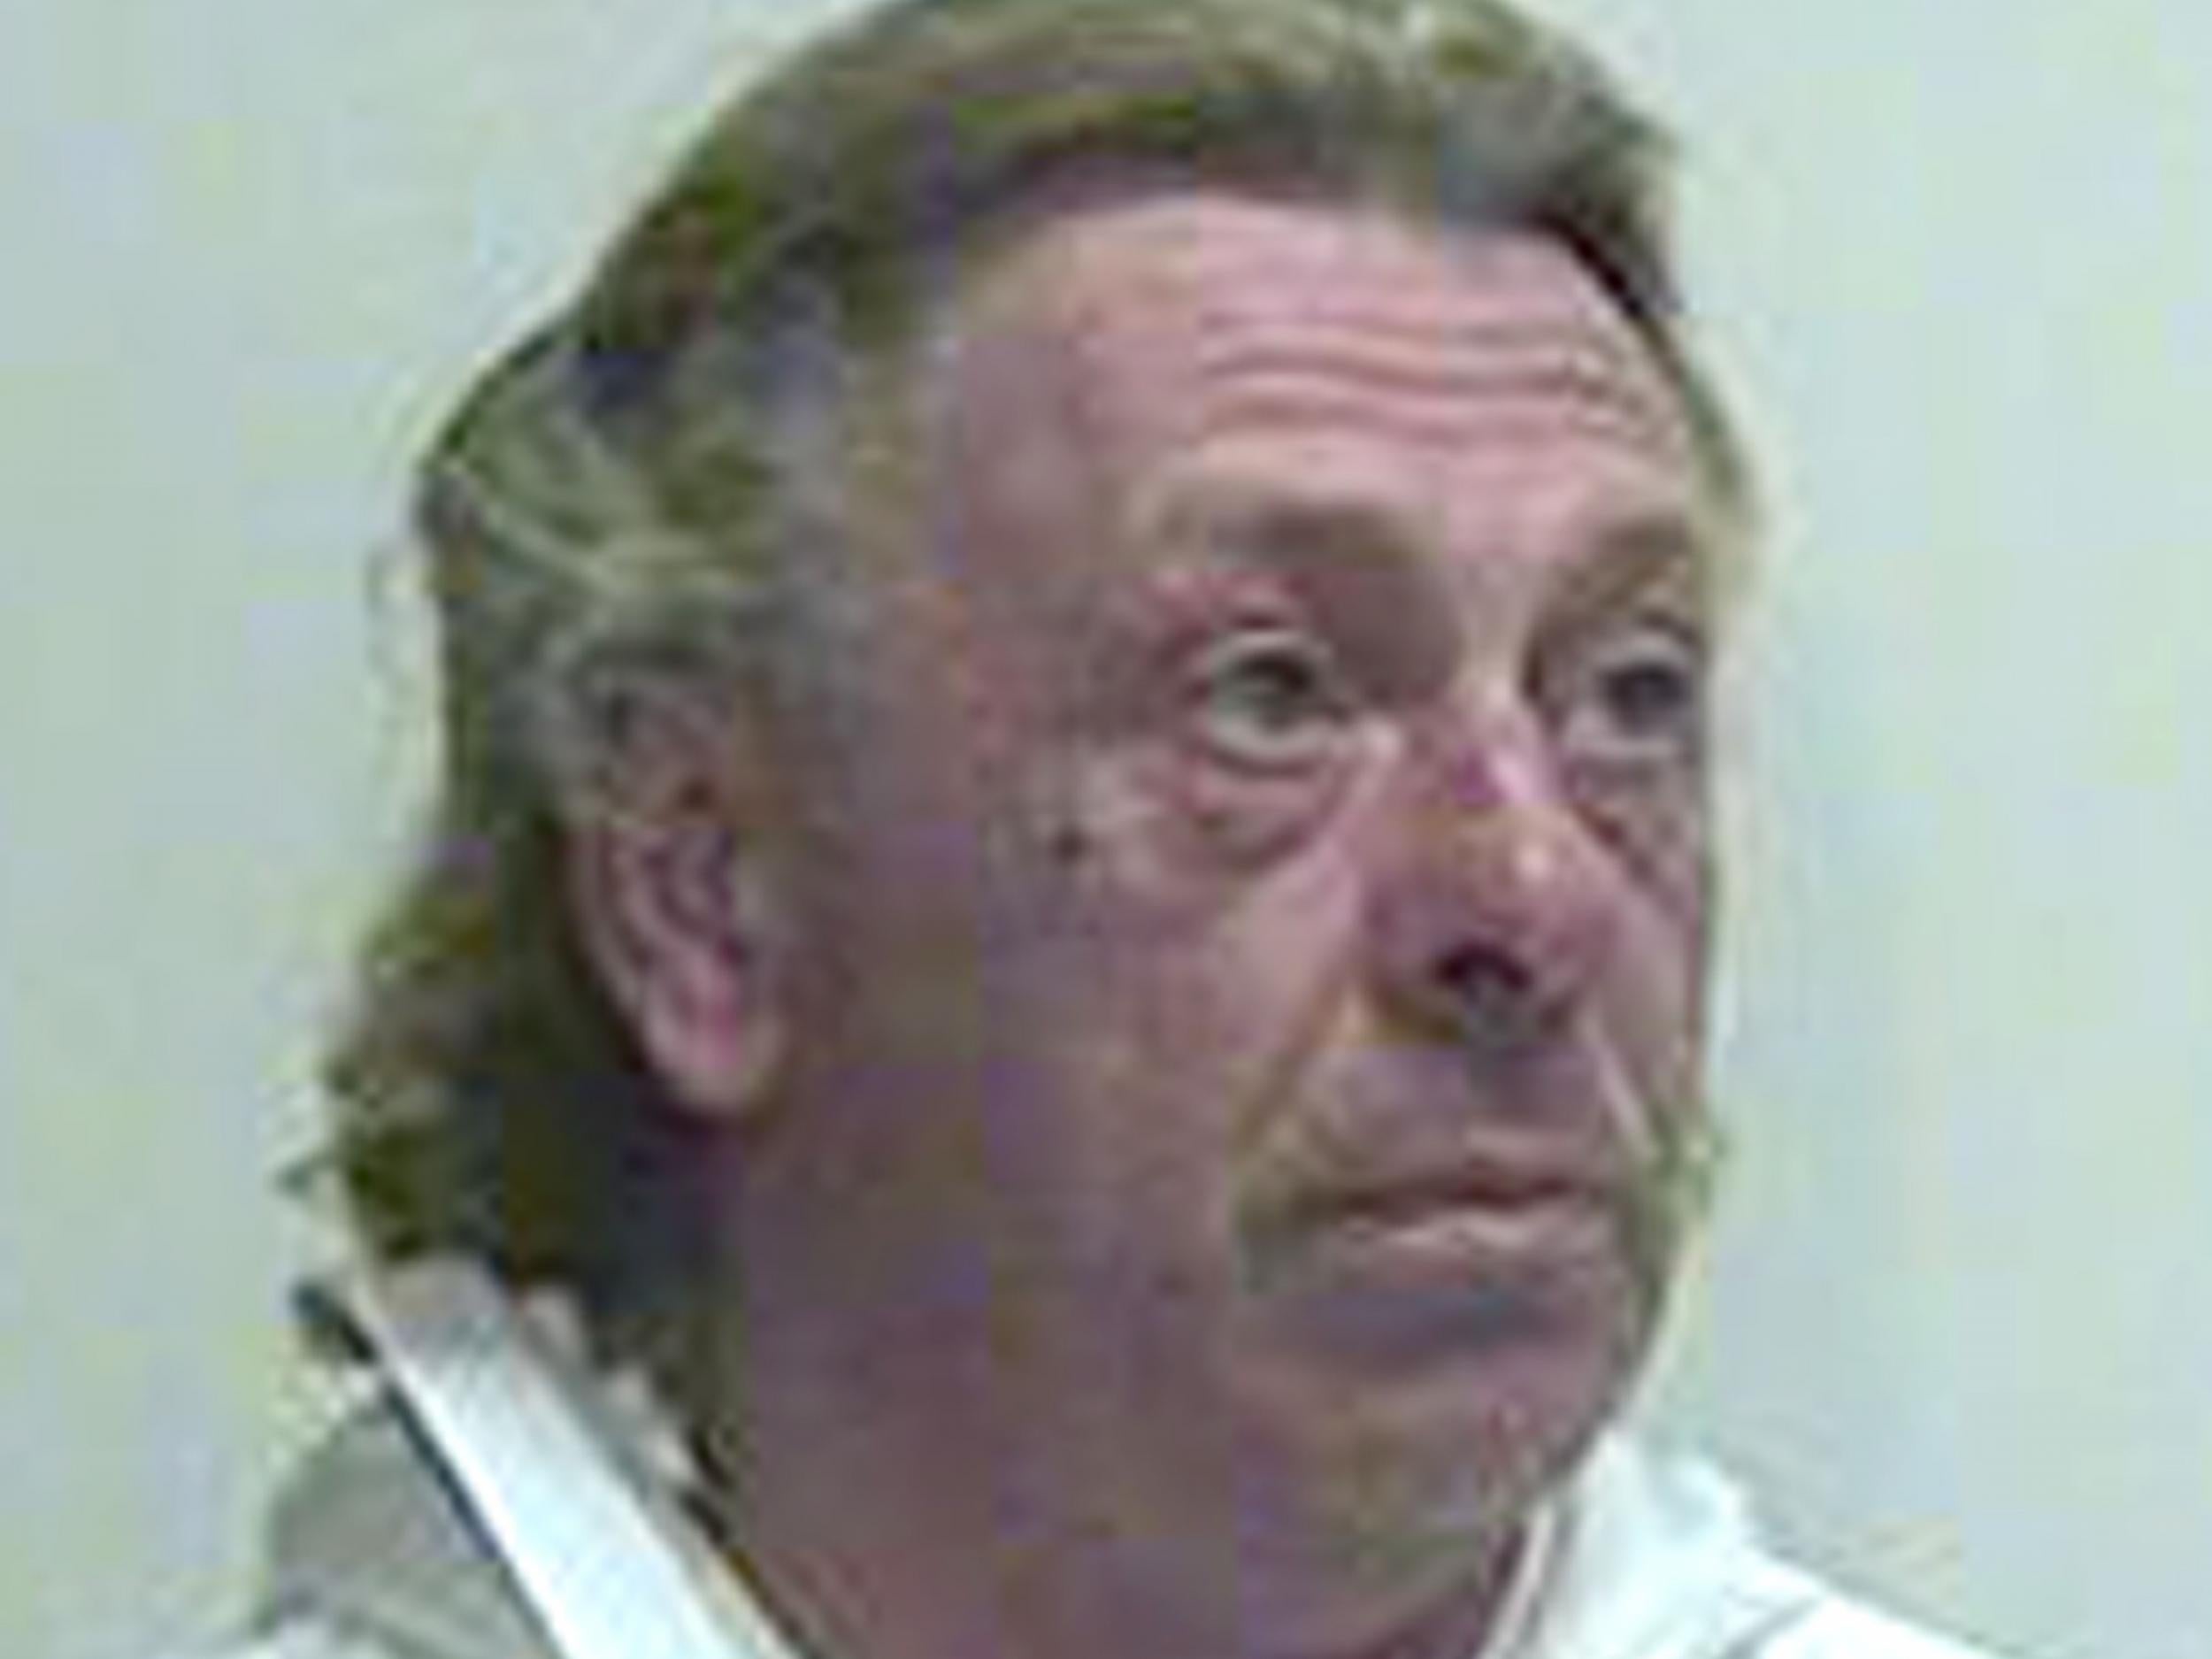 Paul Johnson confessed to the crimes, telling police officers he wanted to watch the buildings burn down, a court heard